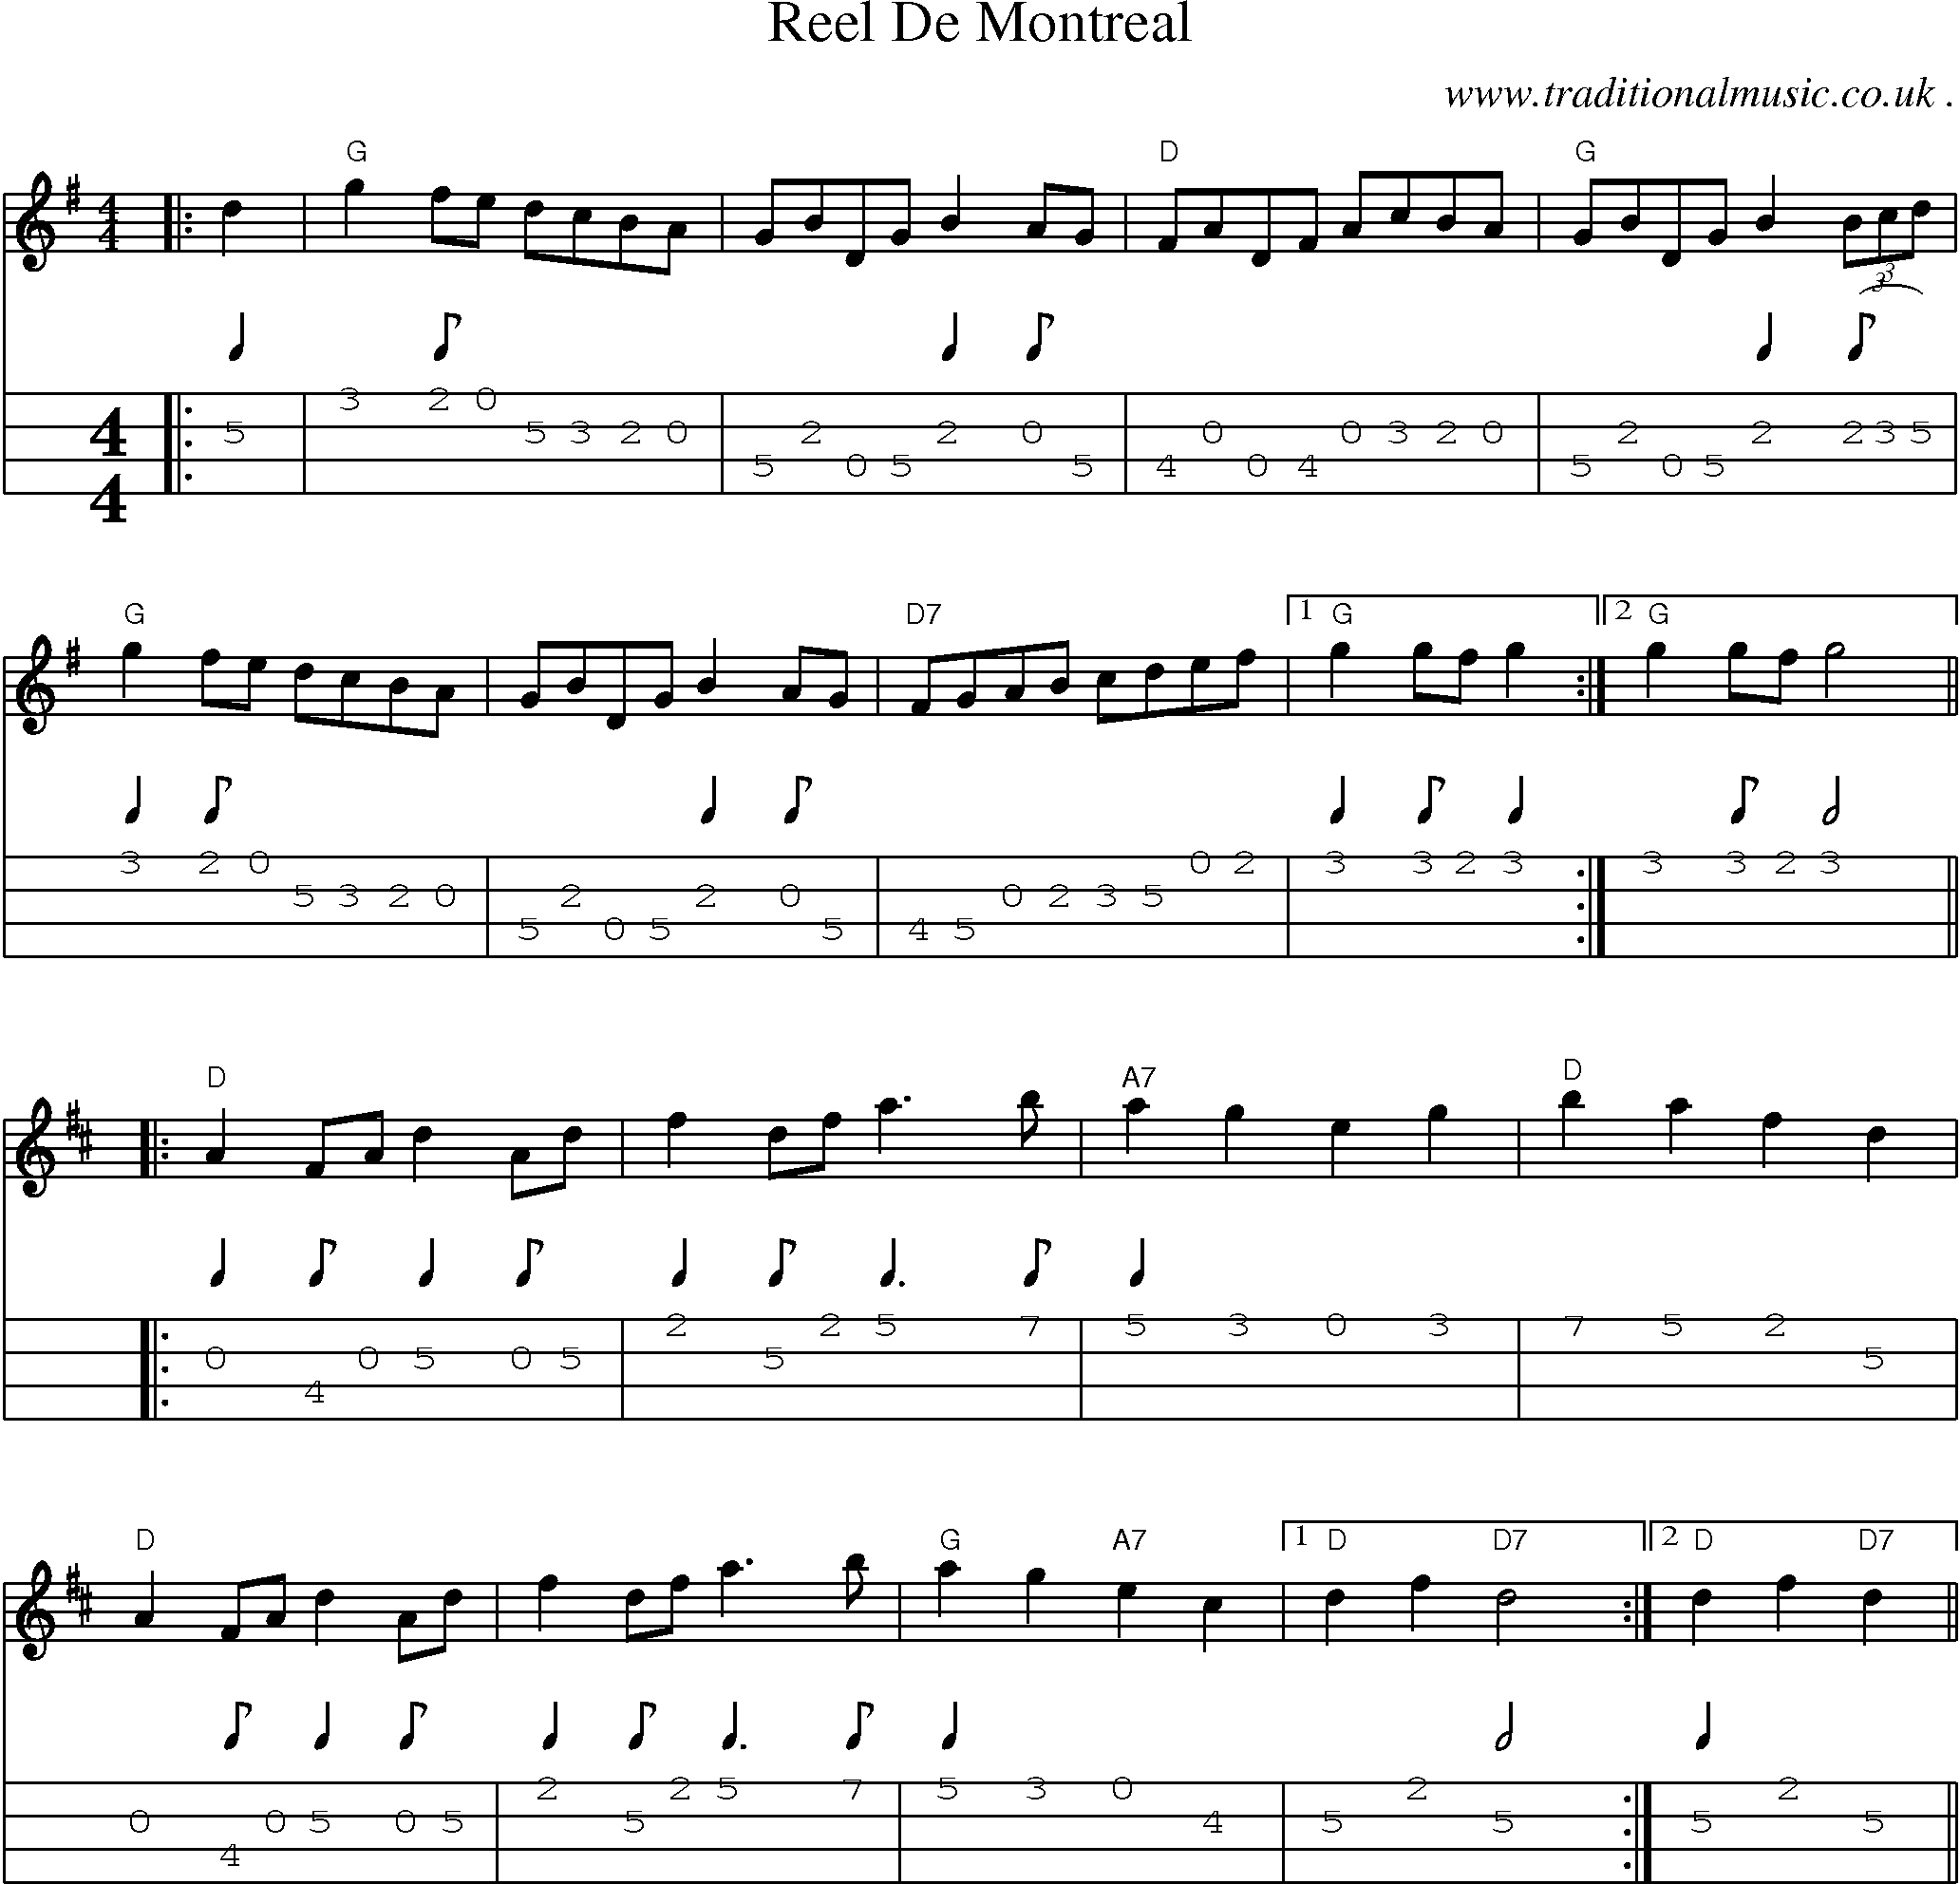 Music Score and Guitar Tabs for Reel De Montreal